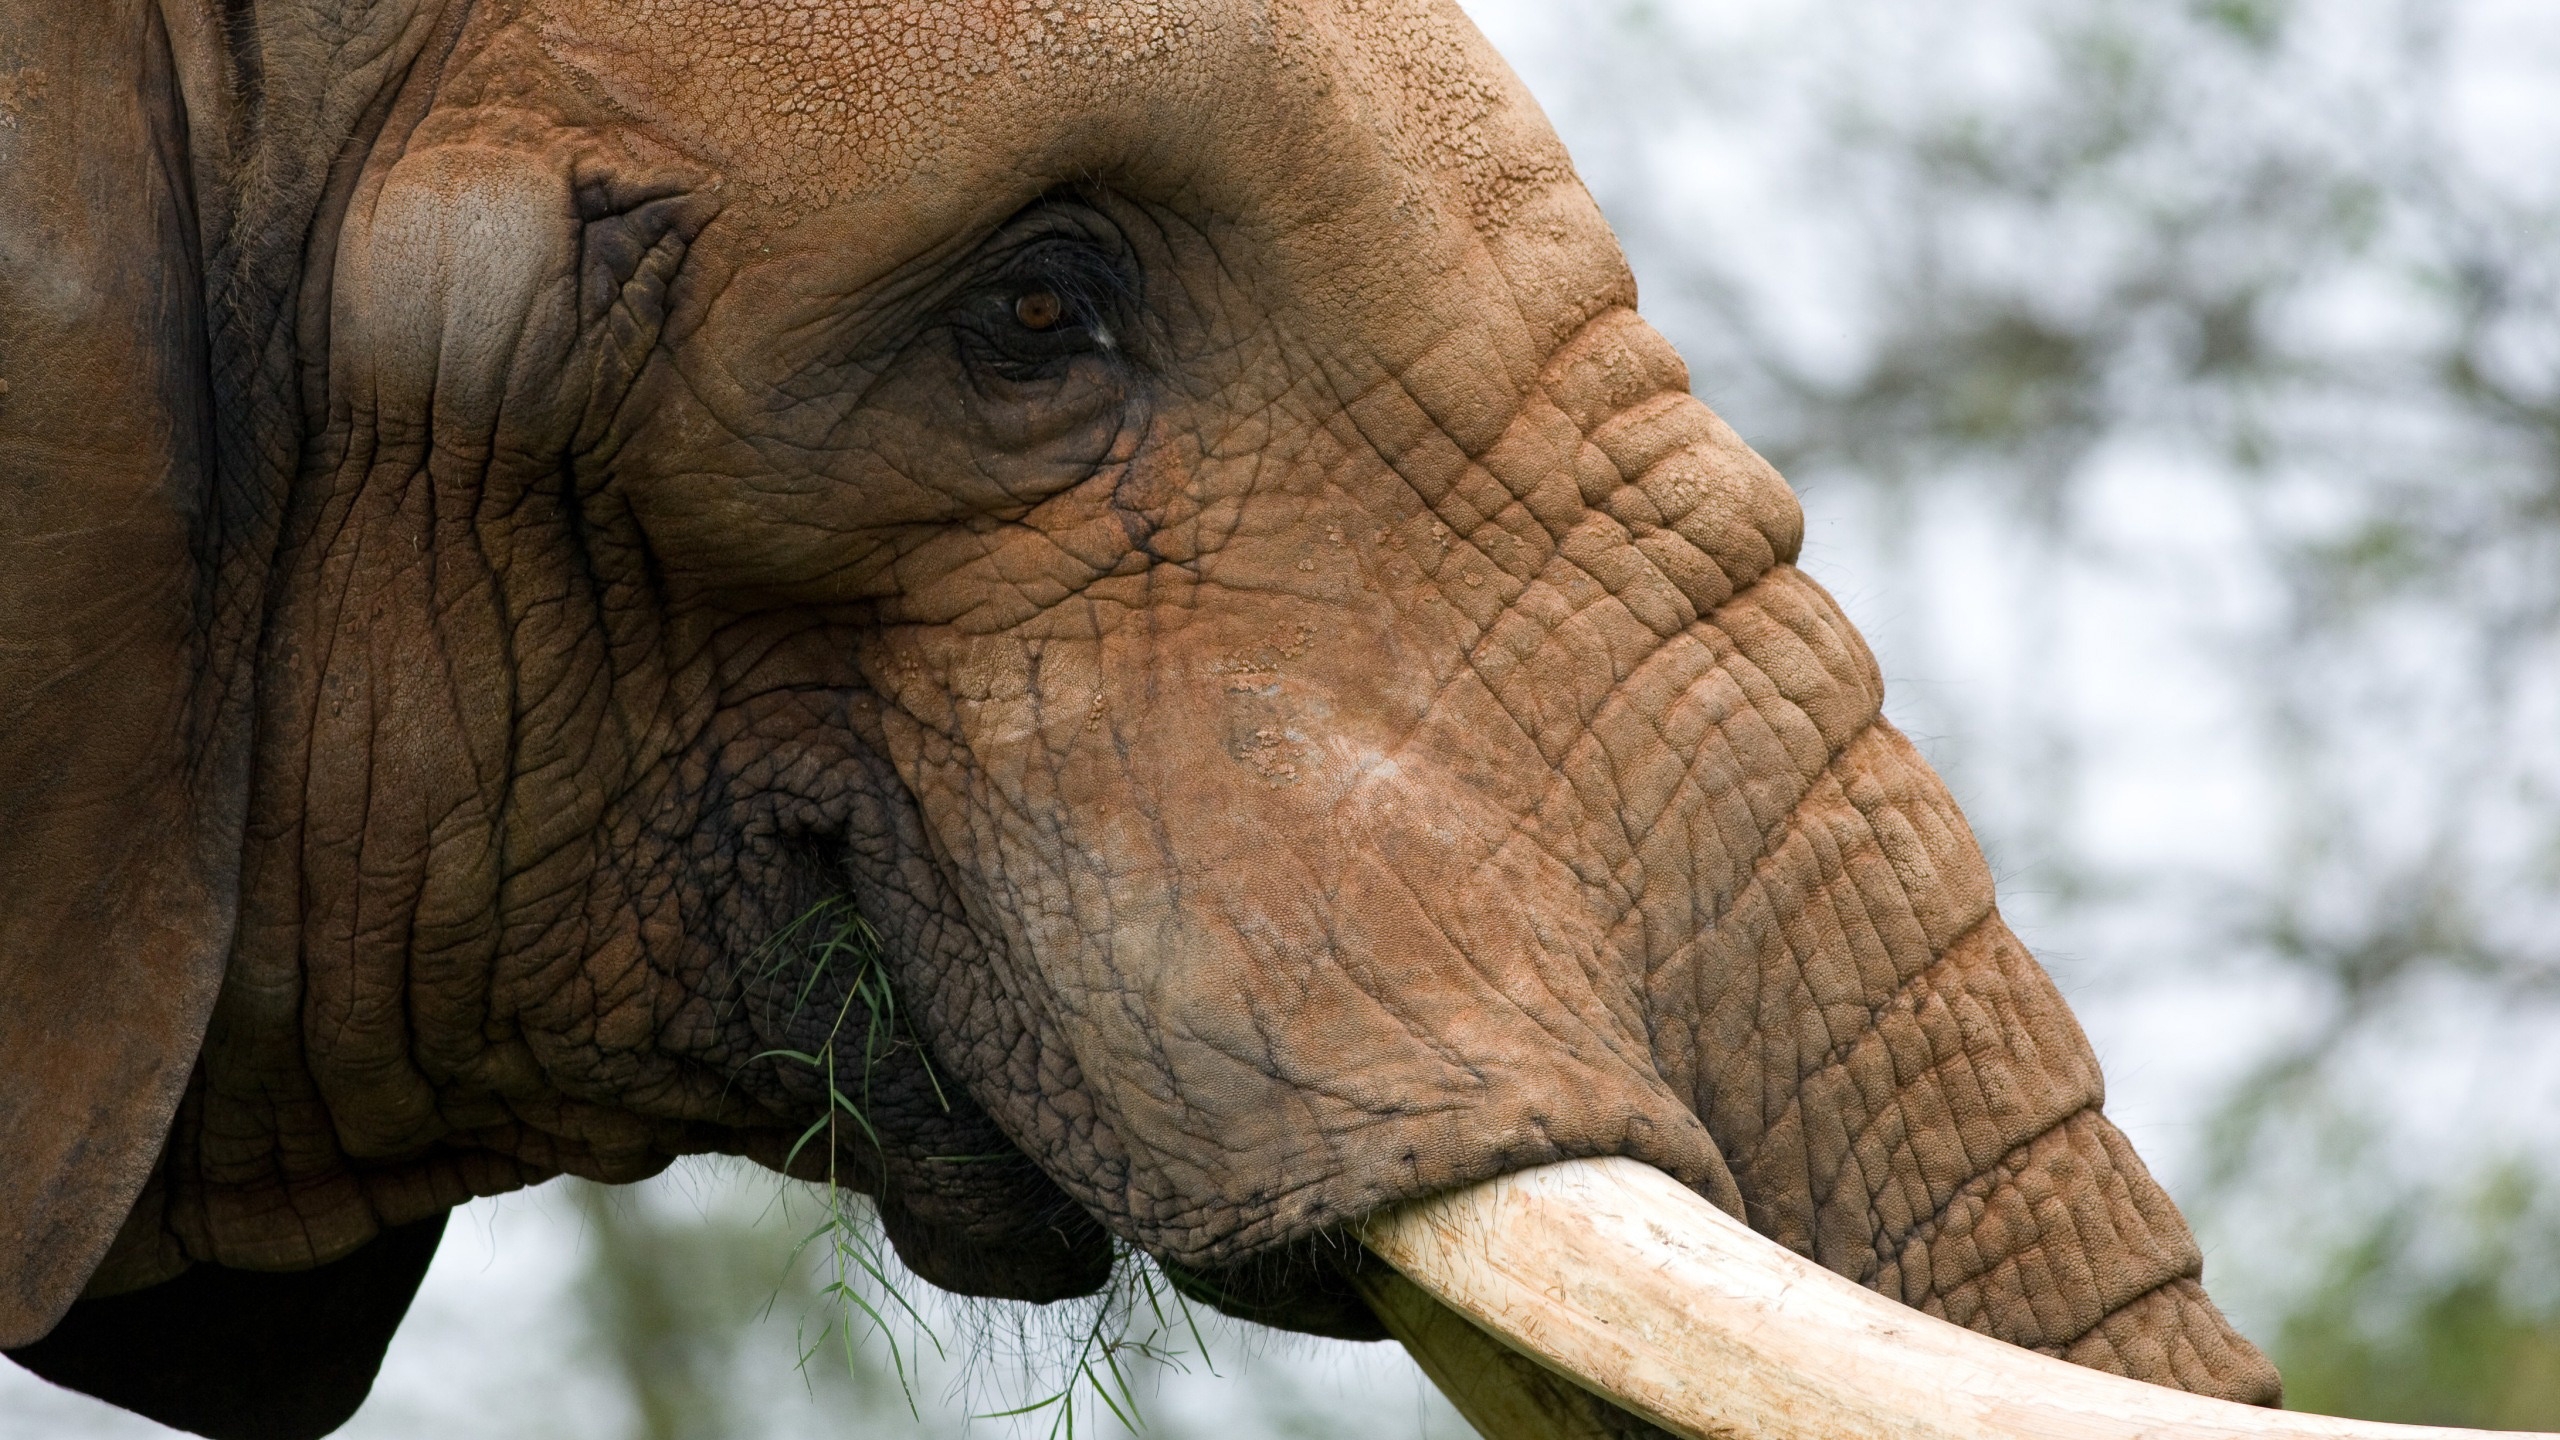 Portrait of an Elephant for 2560x1440 HDTV resolution